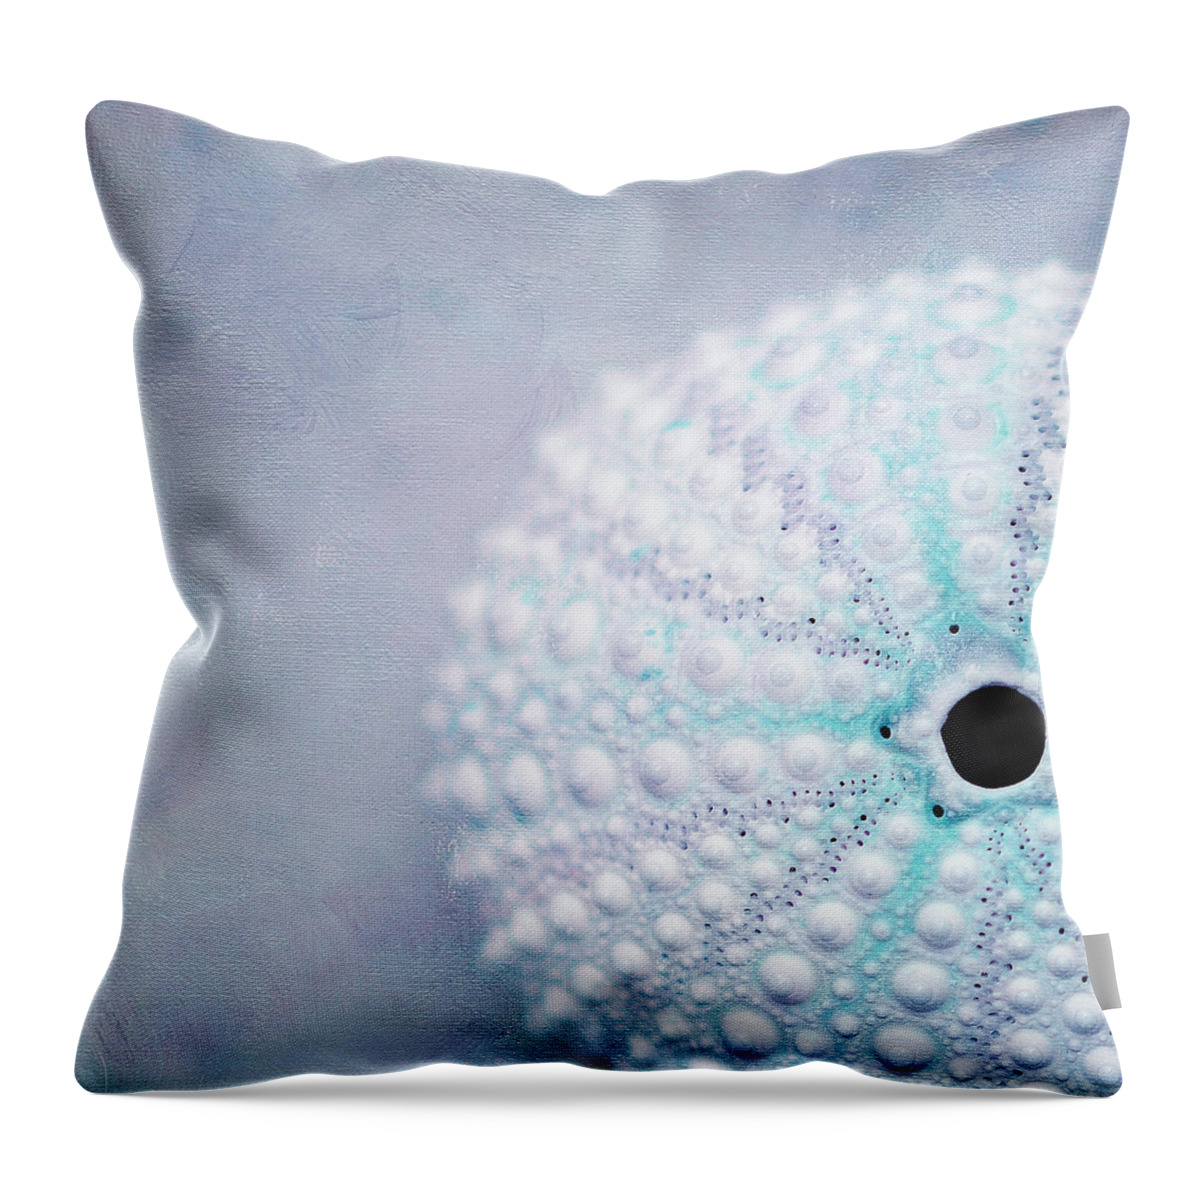 Sea Urchin Throw Pillow featuring the photograph Marooned 7 by Fraida Gutovich